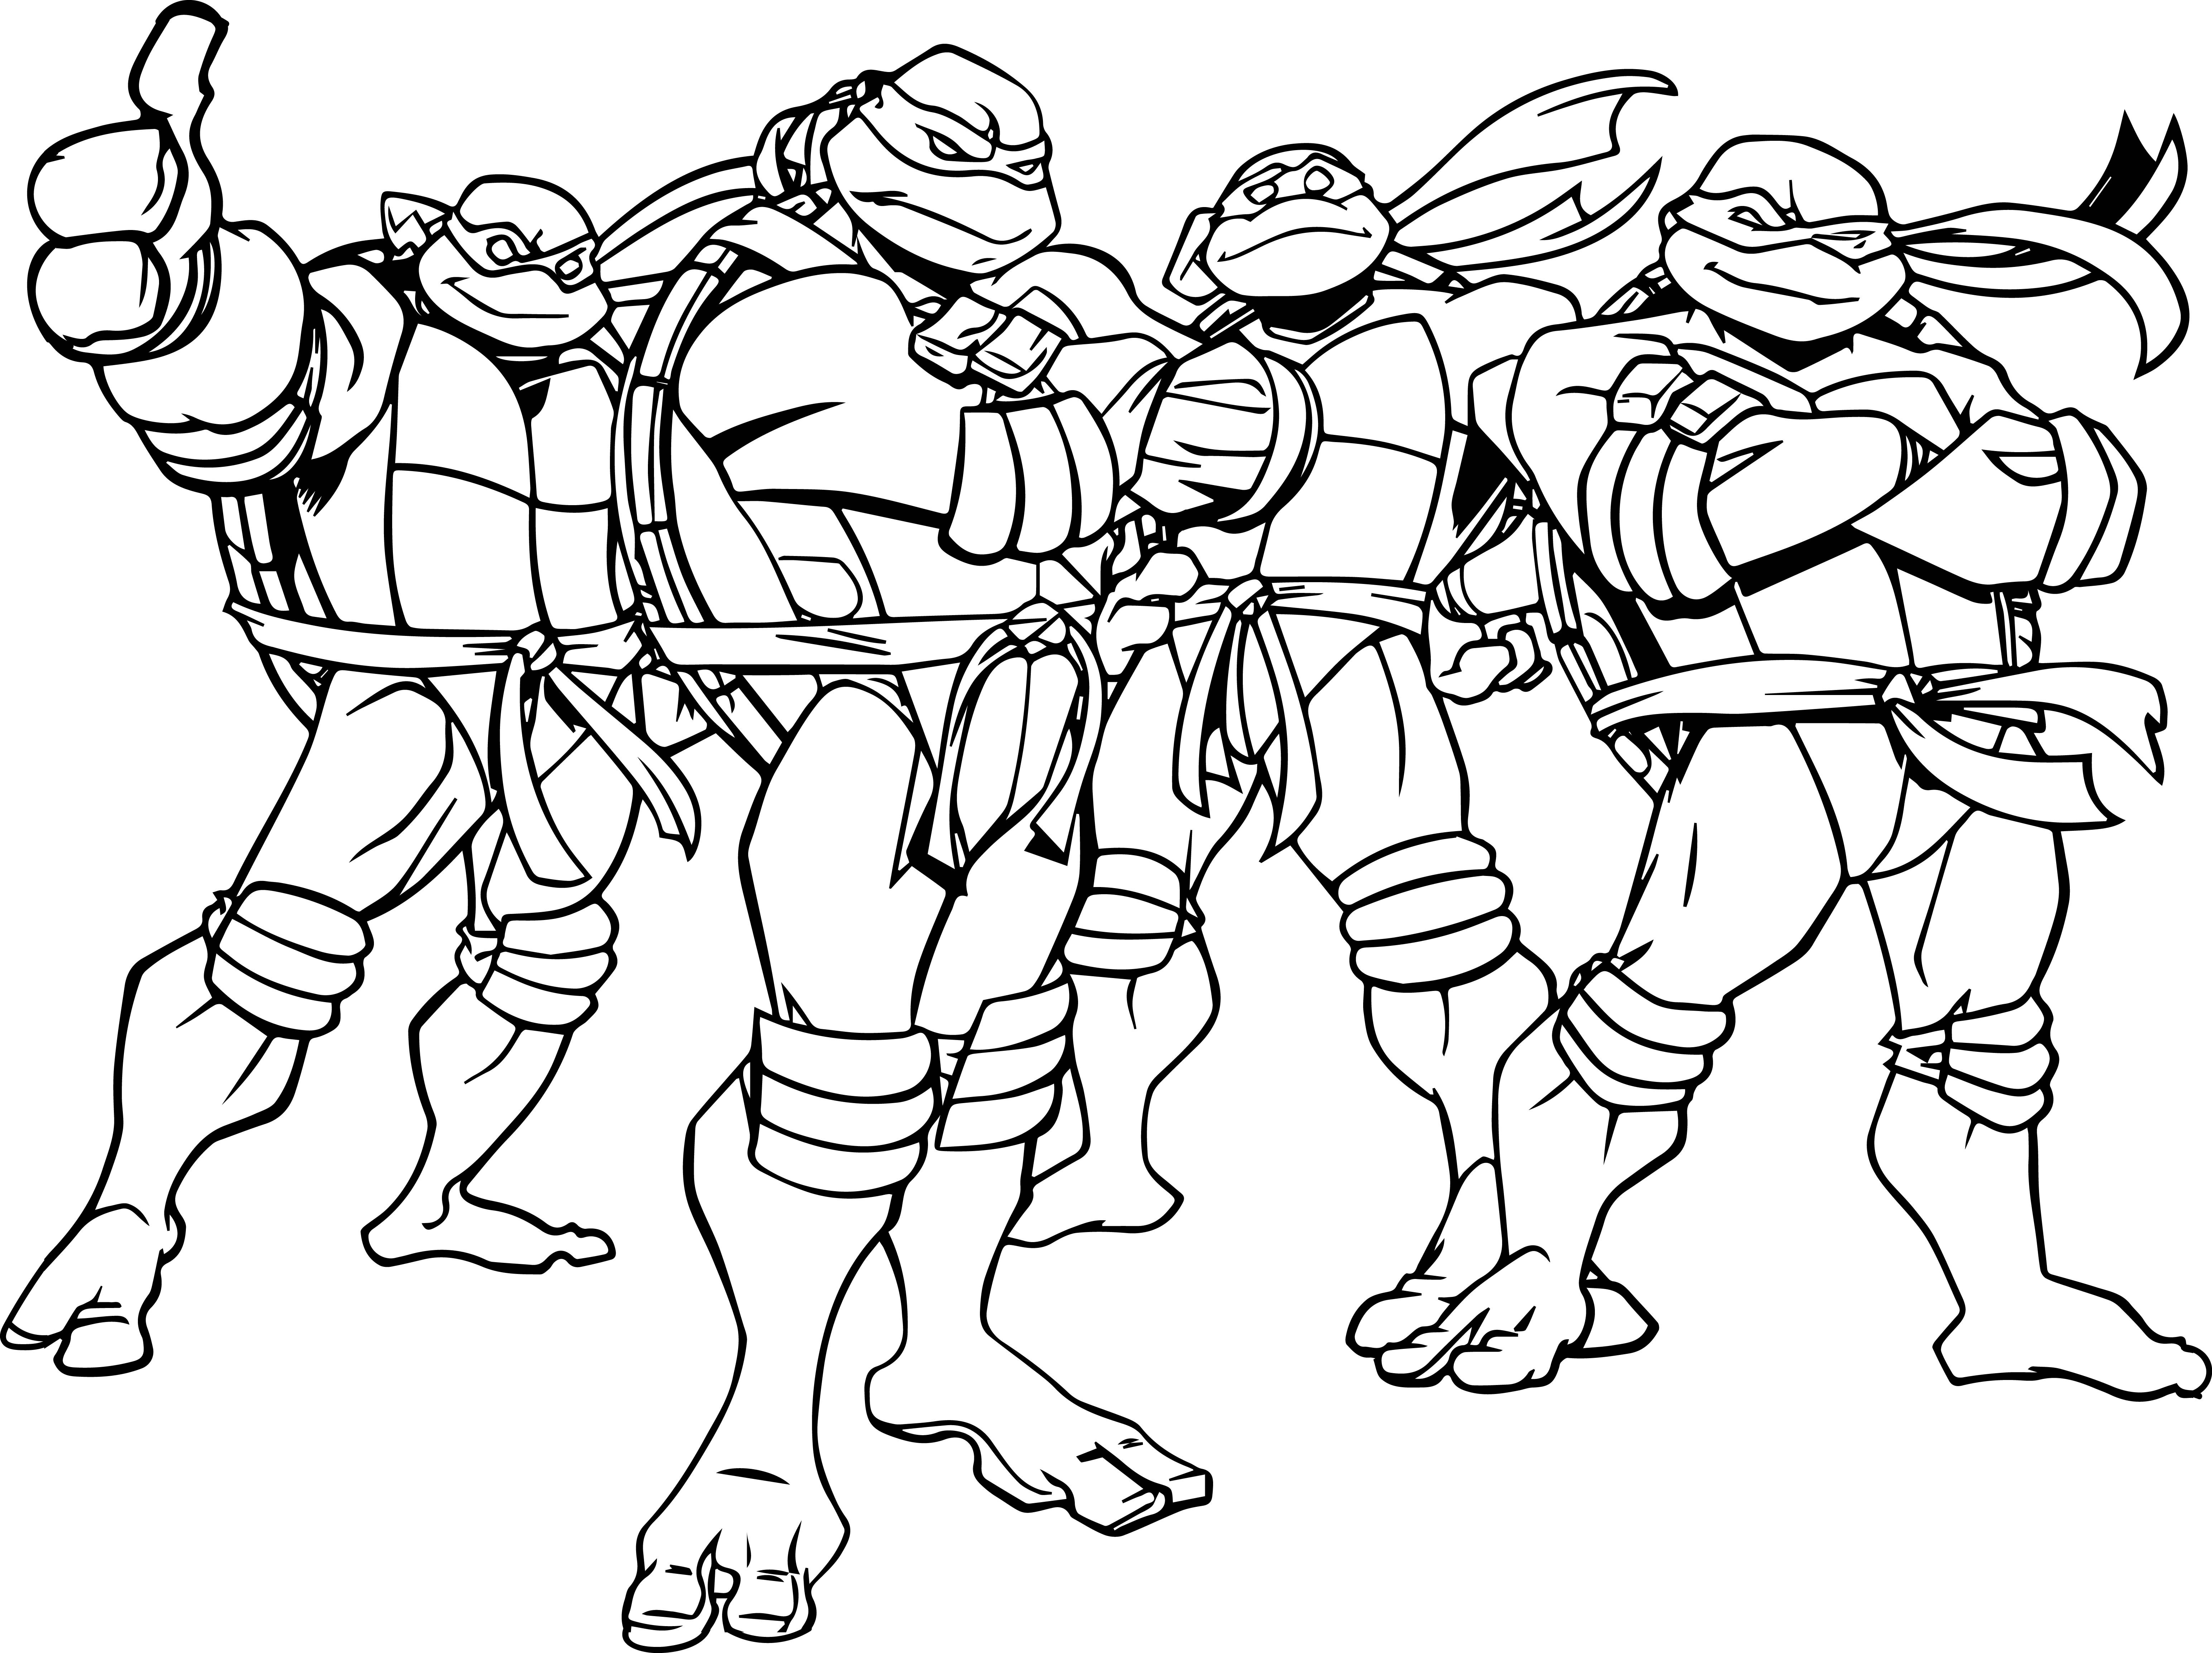 Lego Ninja Turtles Coloring Pages at GetColorings.com ...